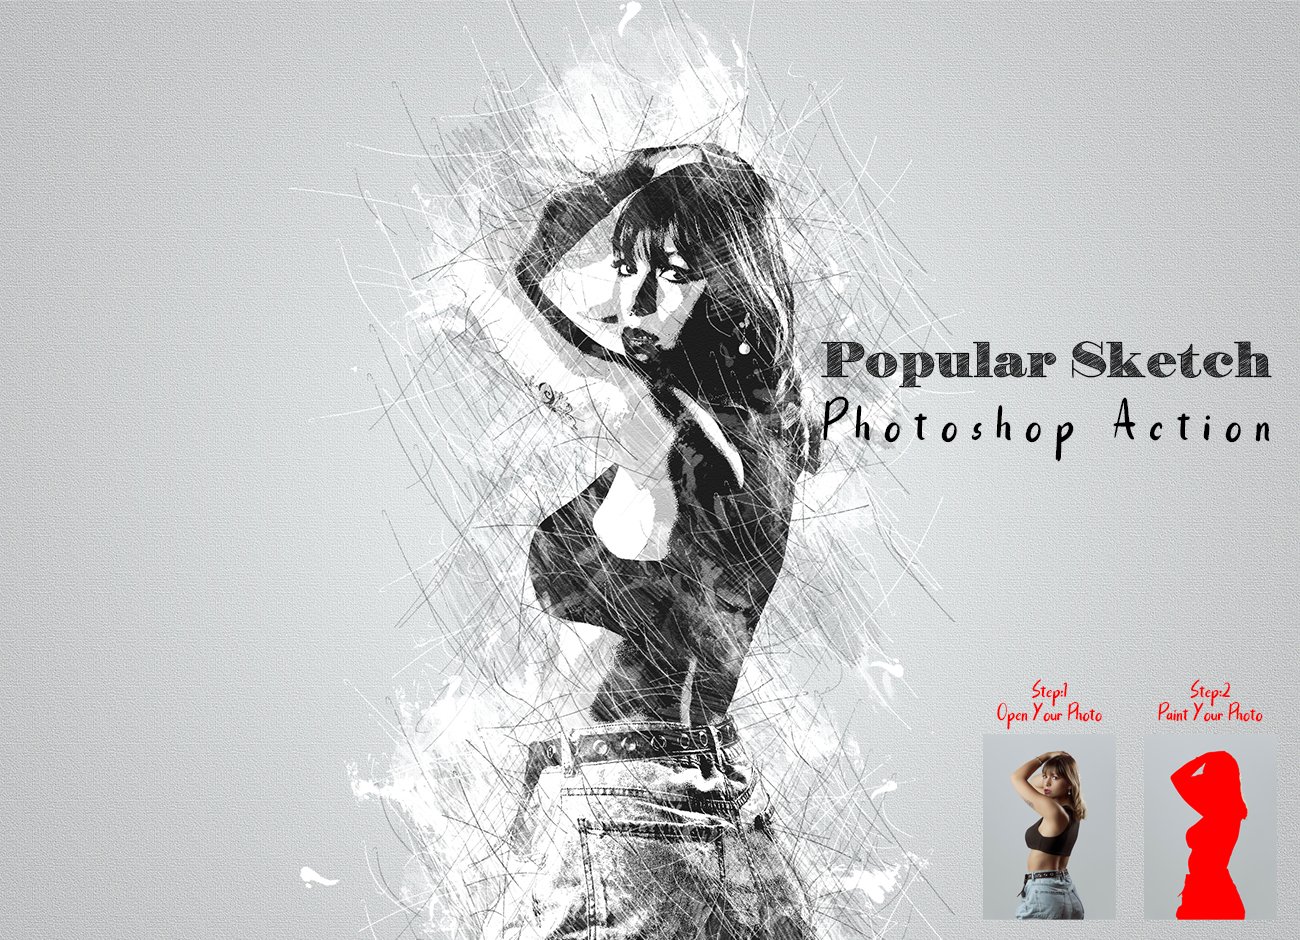 Popular Sketch Photoshop Actioncover image.